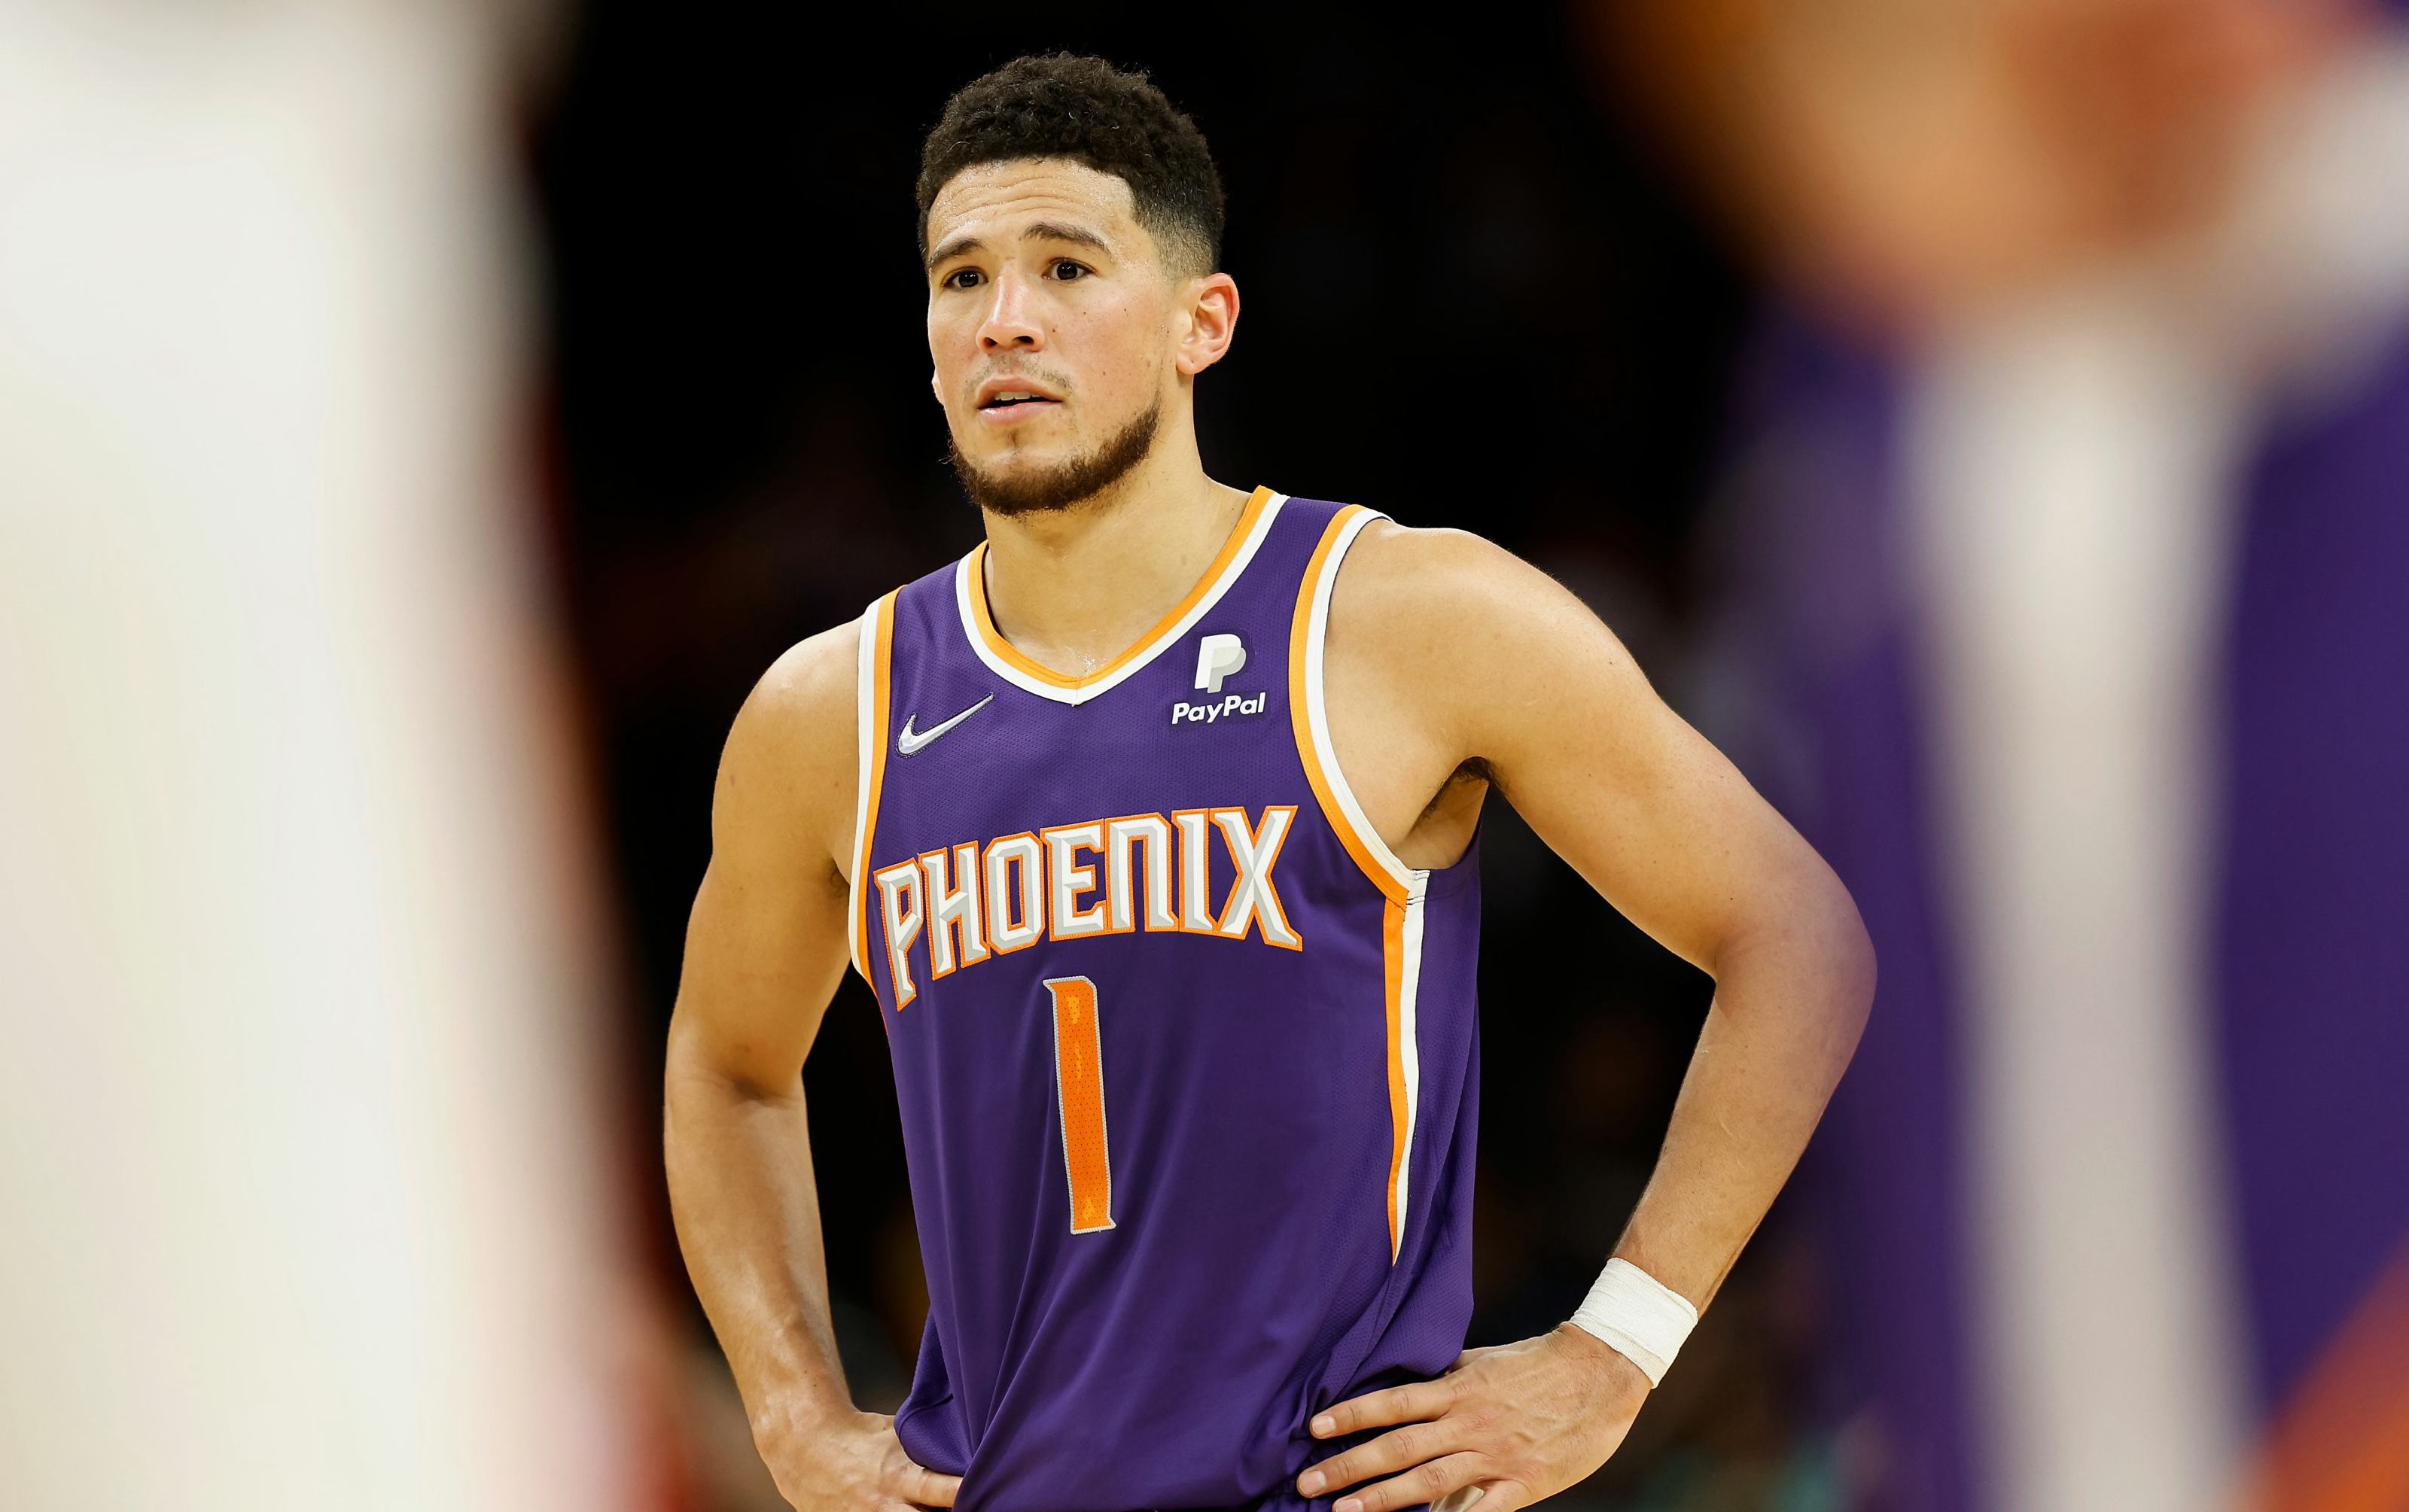 Phoenix Suns' Devin Booker again voted NBA's best shooting guard